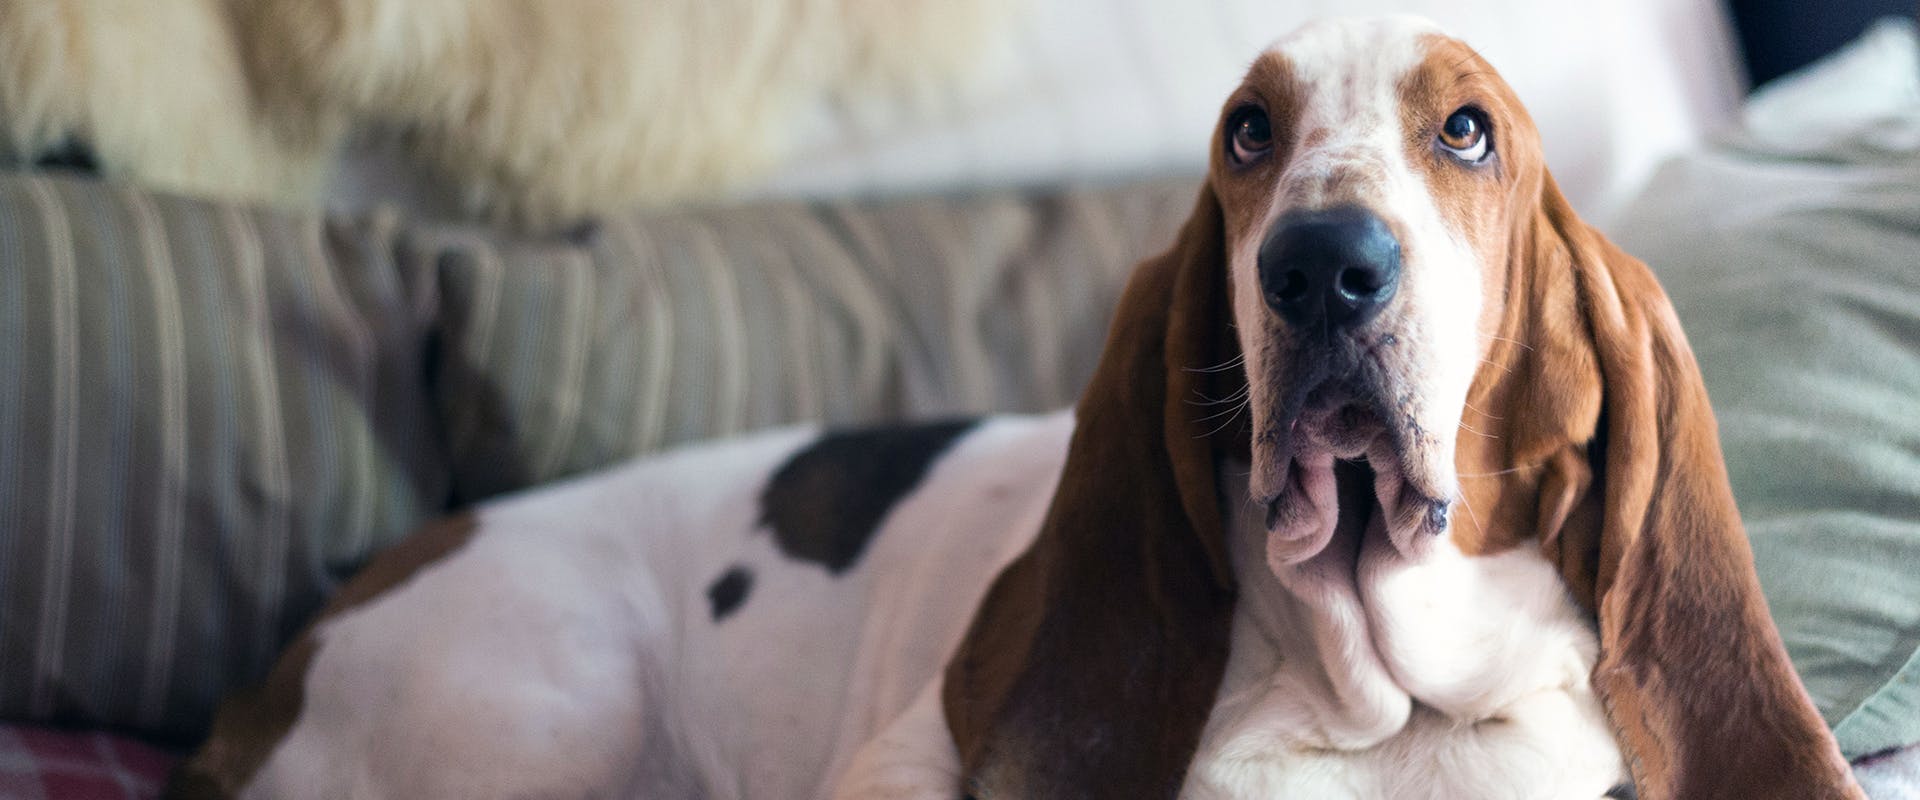 A Basset Hound with floppy ears